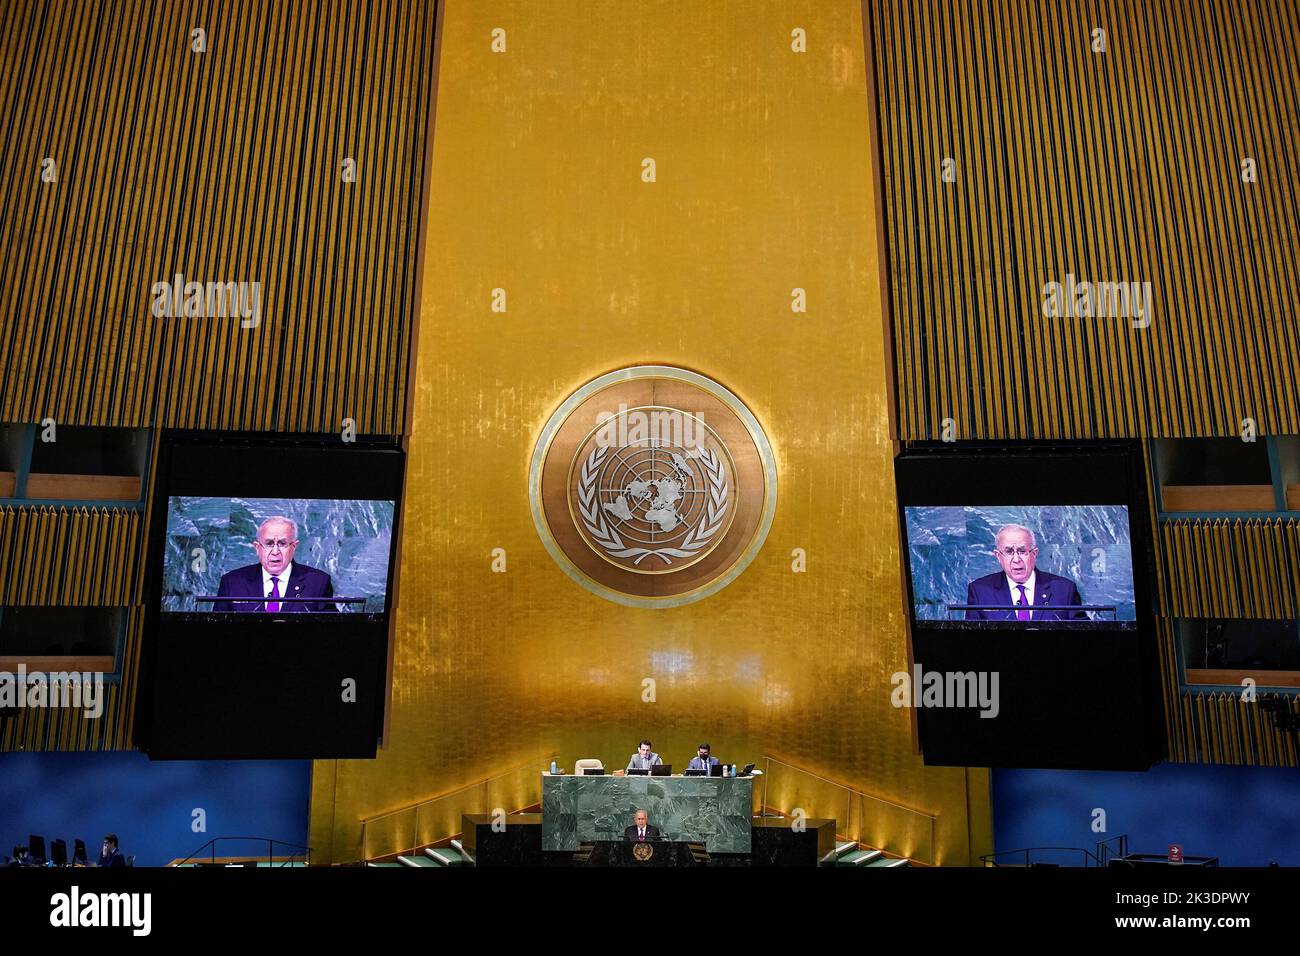 Algeria's Foreign Minister Ramtane Lamamra addresses the 77th Session of the United Nations General Assembly at U.N. Headquarters in New York City, U.S., September 26, 2022. REUTERS/Eduardo Munoz Stock Photo